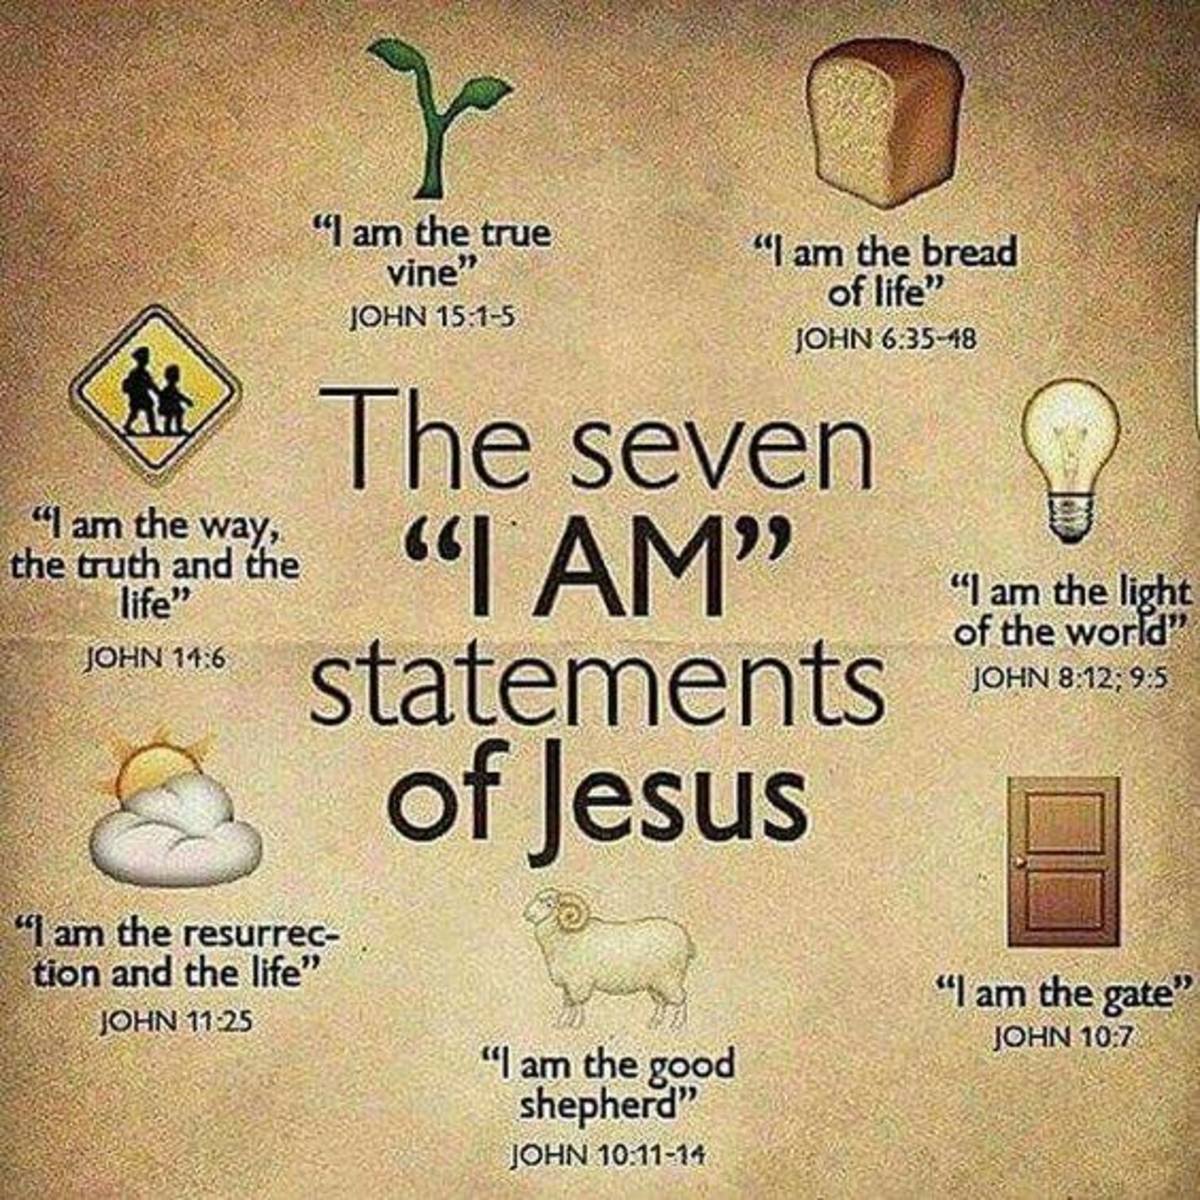 Seven statements Jesus made about Himself.